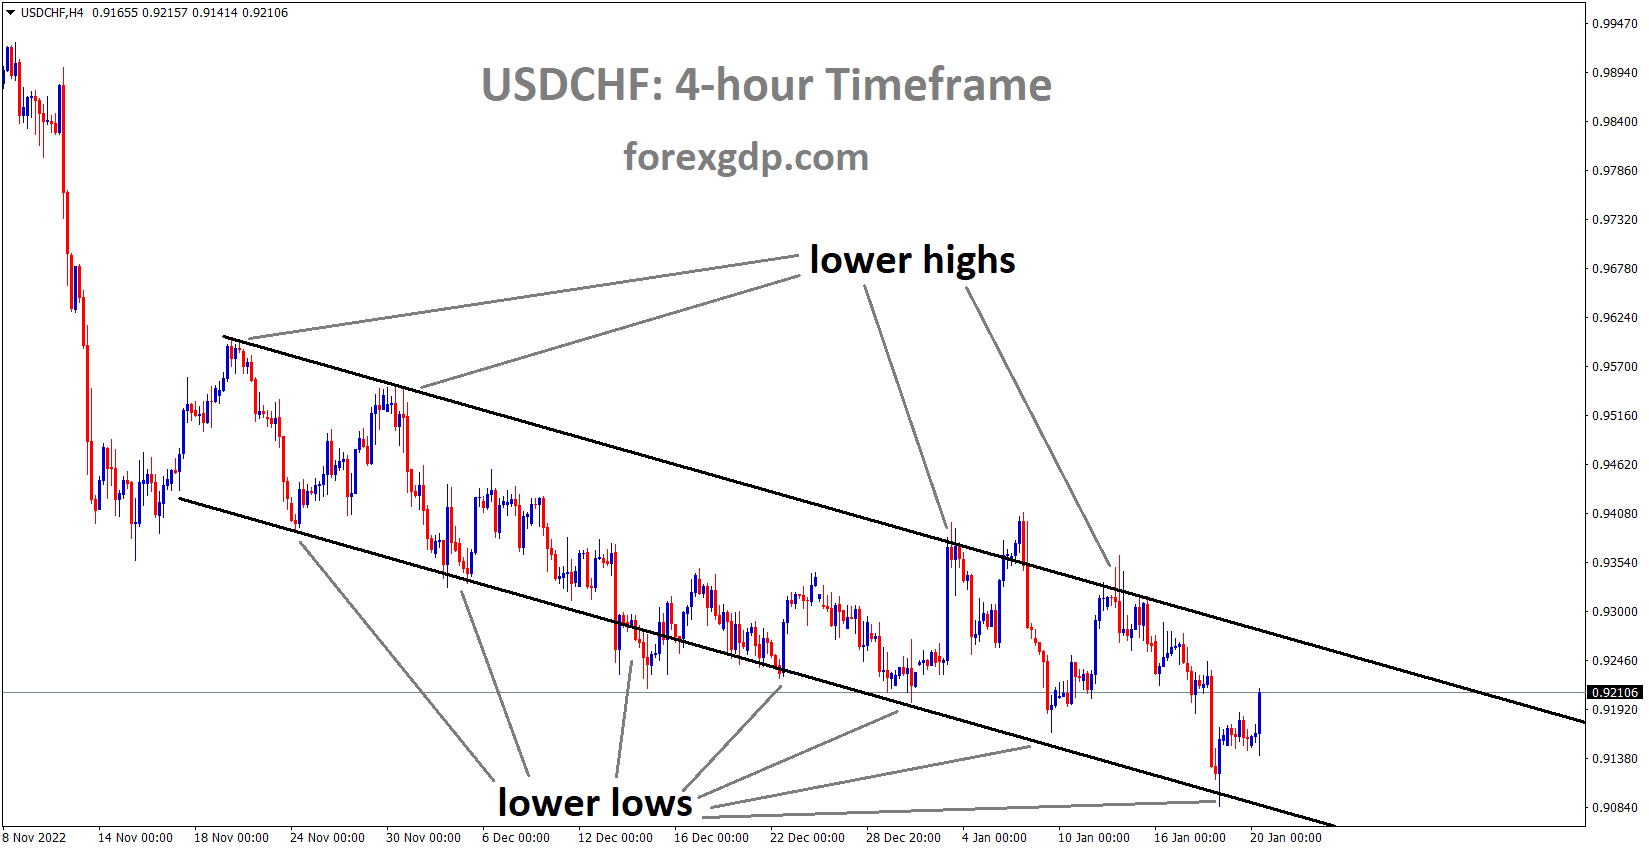 USDCHF is moving in the Descending channel and the market has rebounded from the lower low area of the channel 2